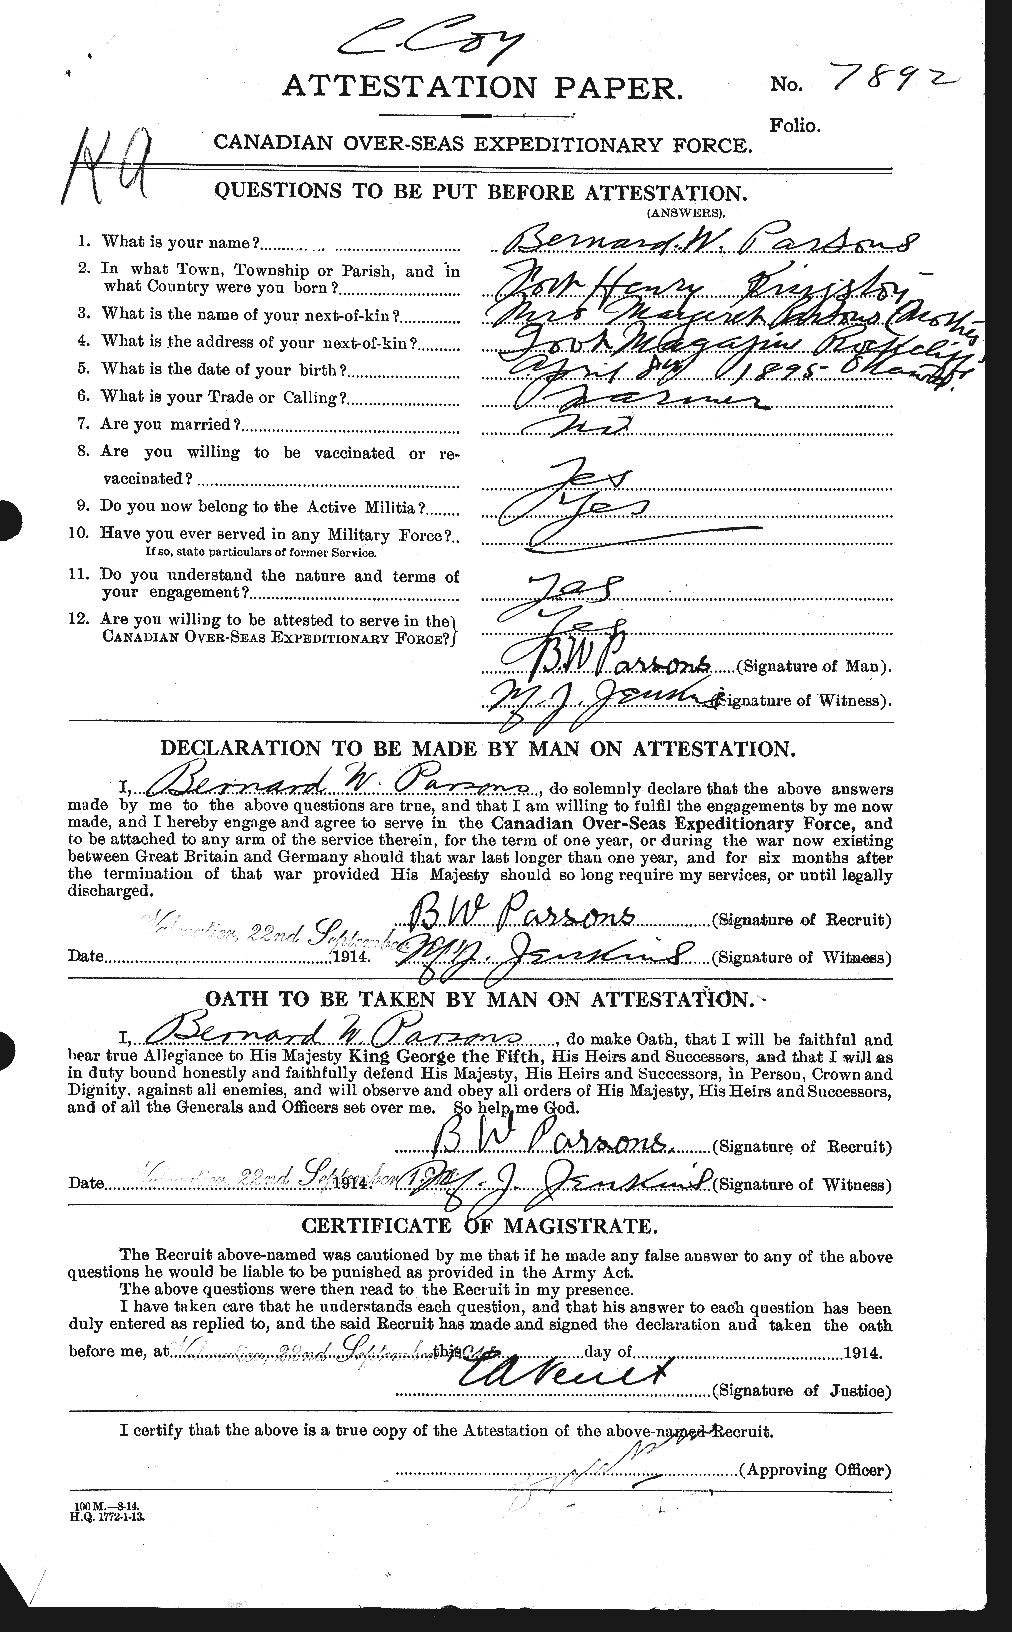 Personnel Records of the First World War - CEF 566780a